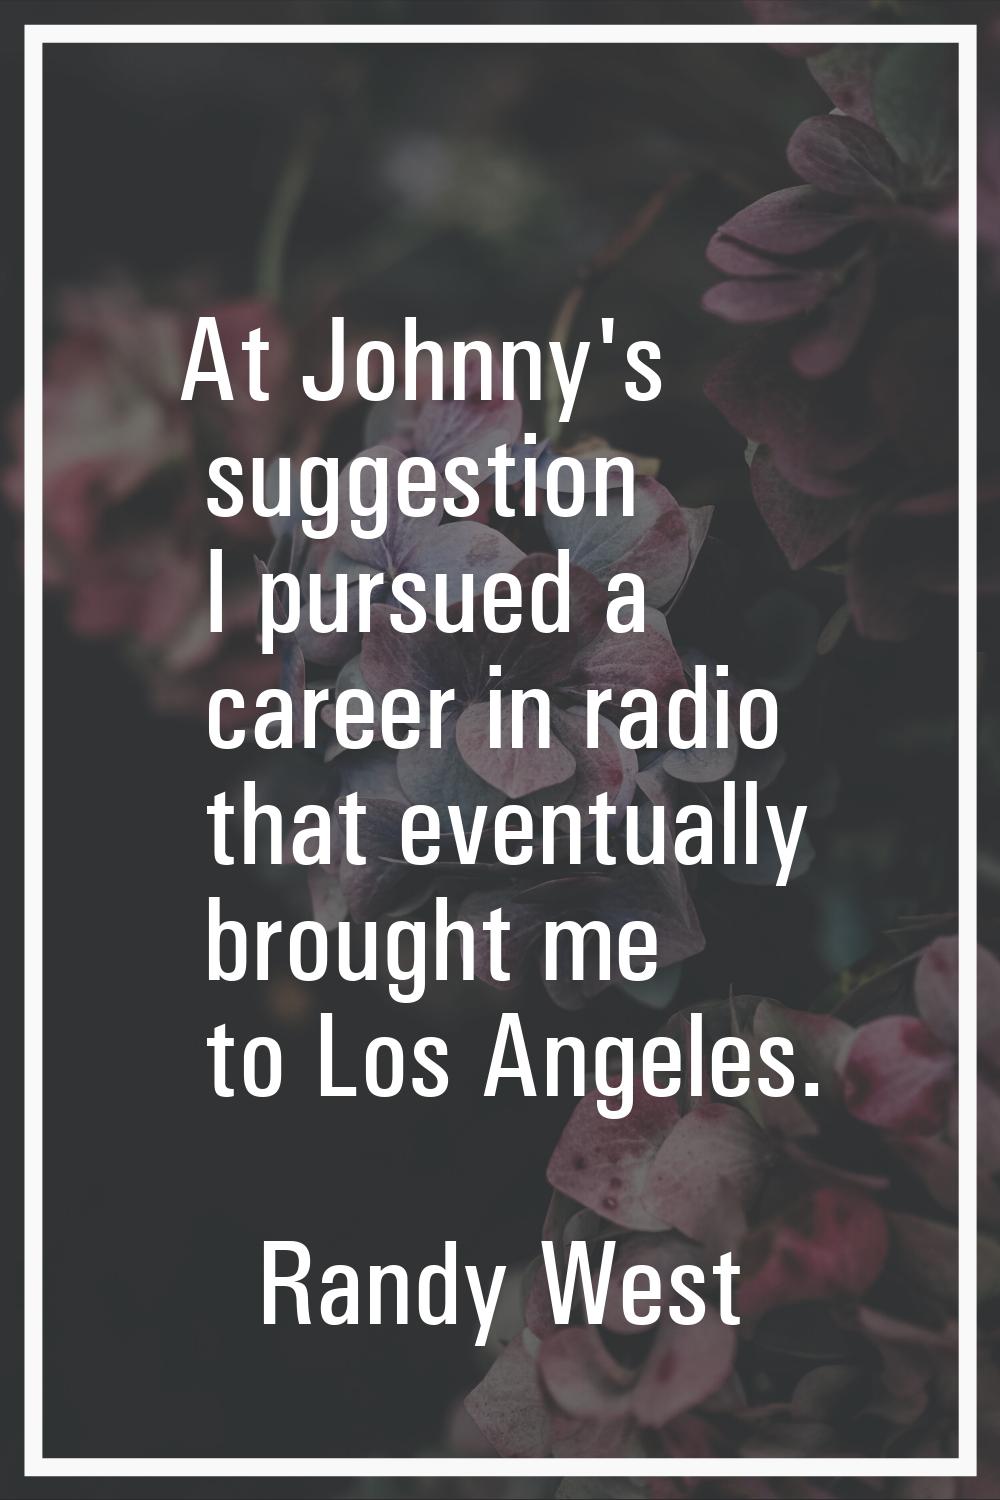 At Johnny's suggestion I pursued a career in radio that eventually brought me to Los Angeles.